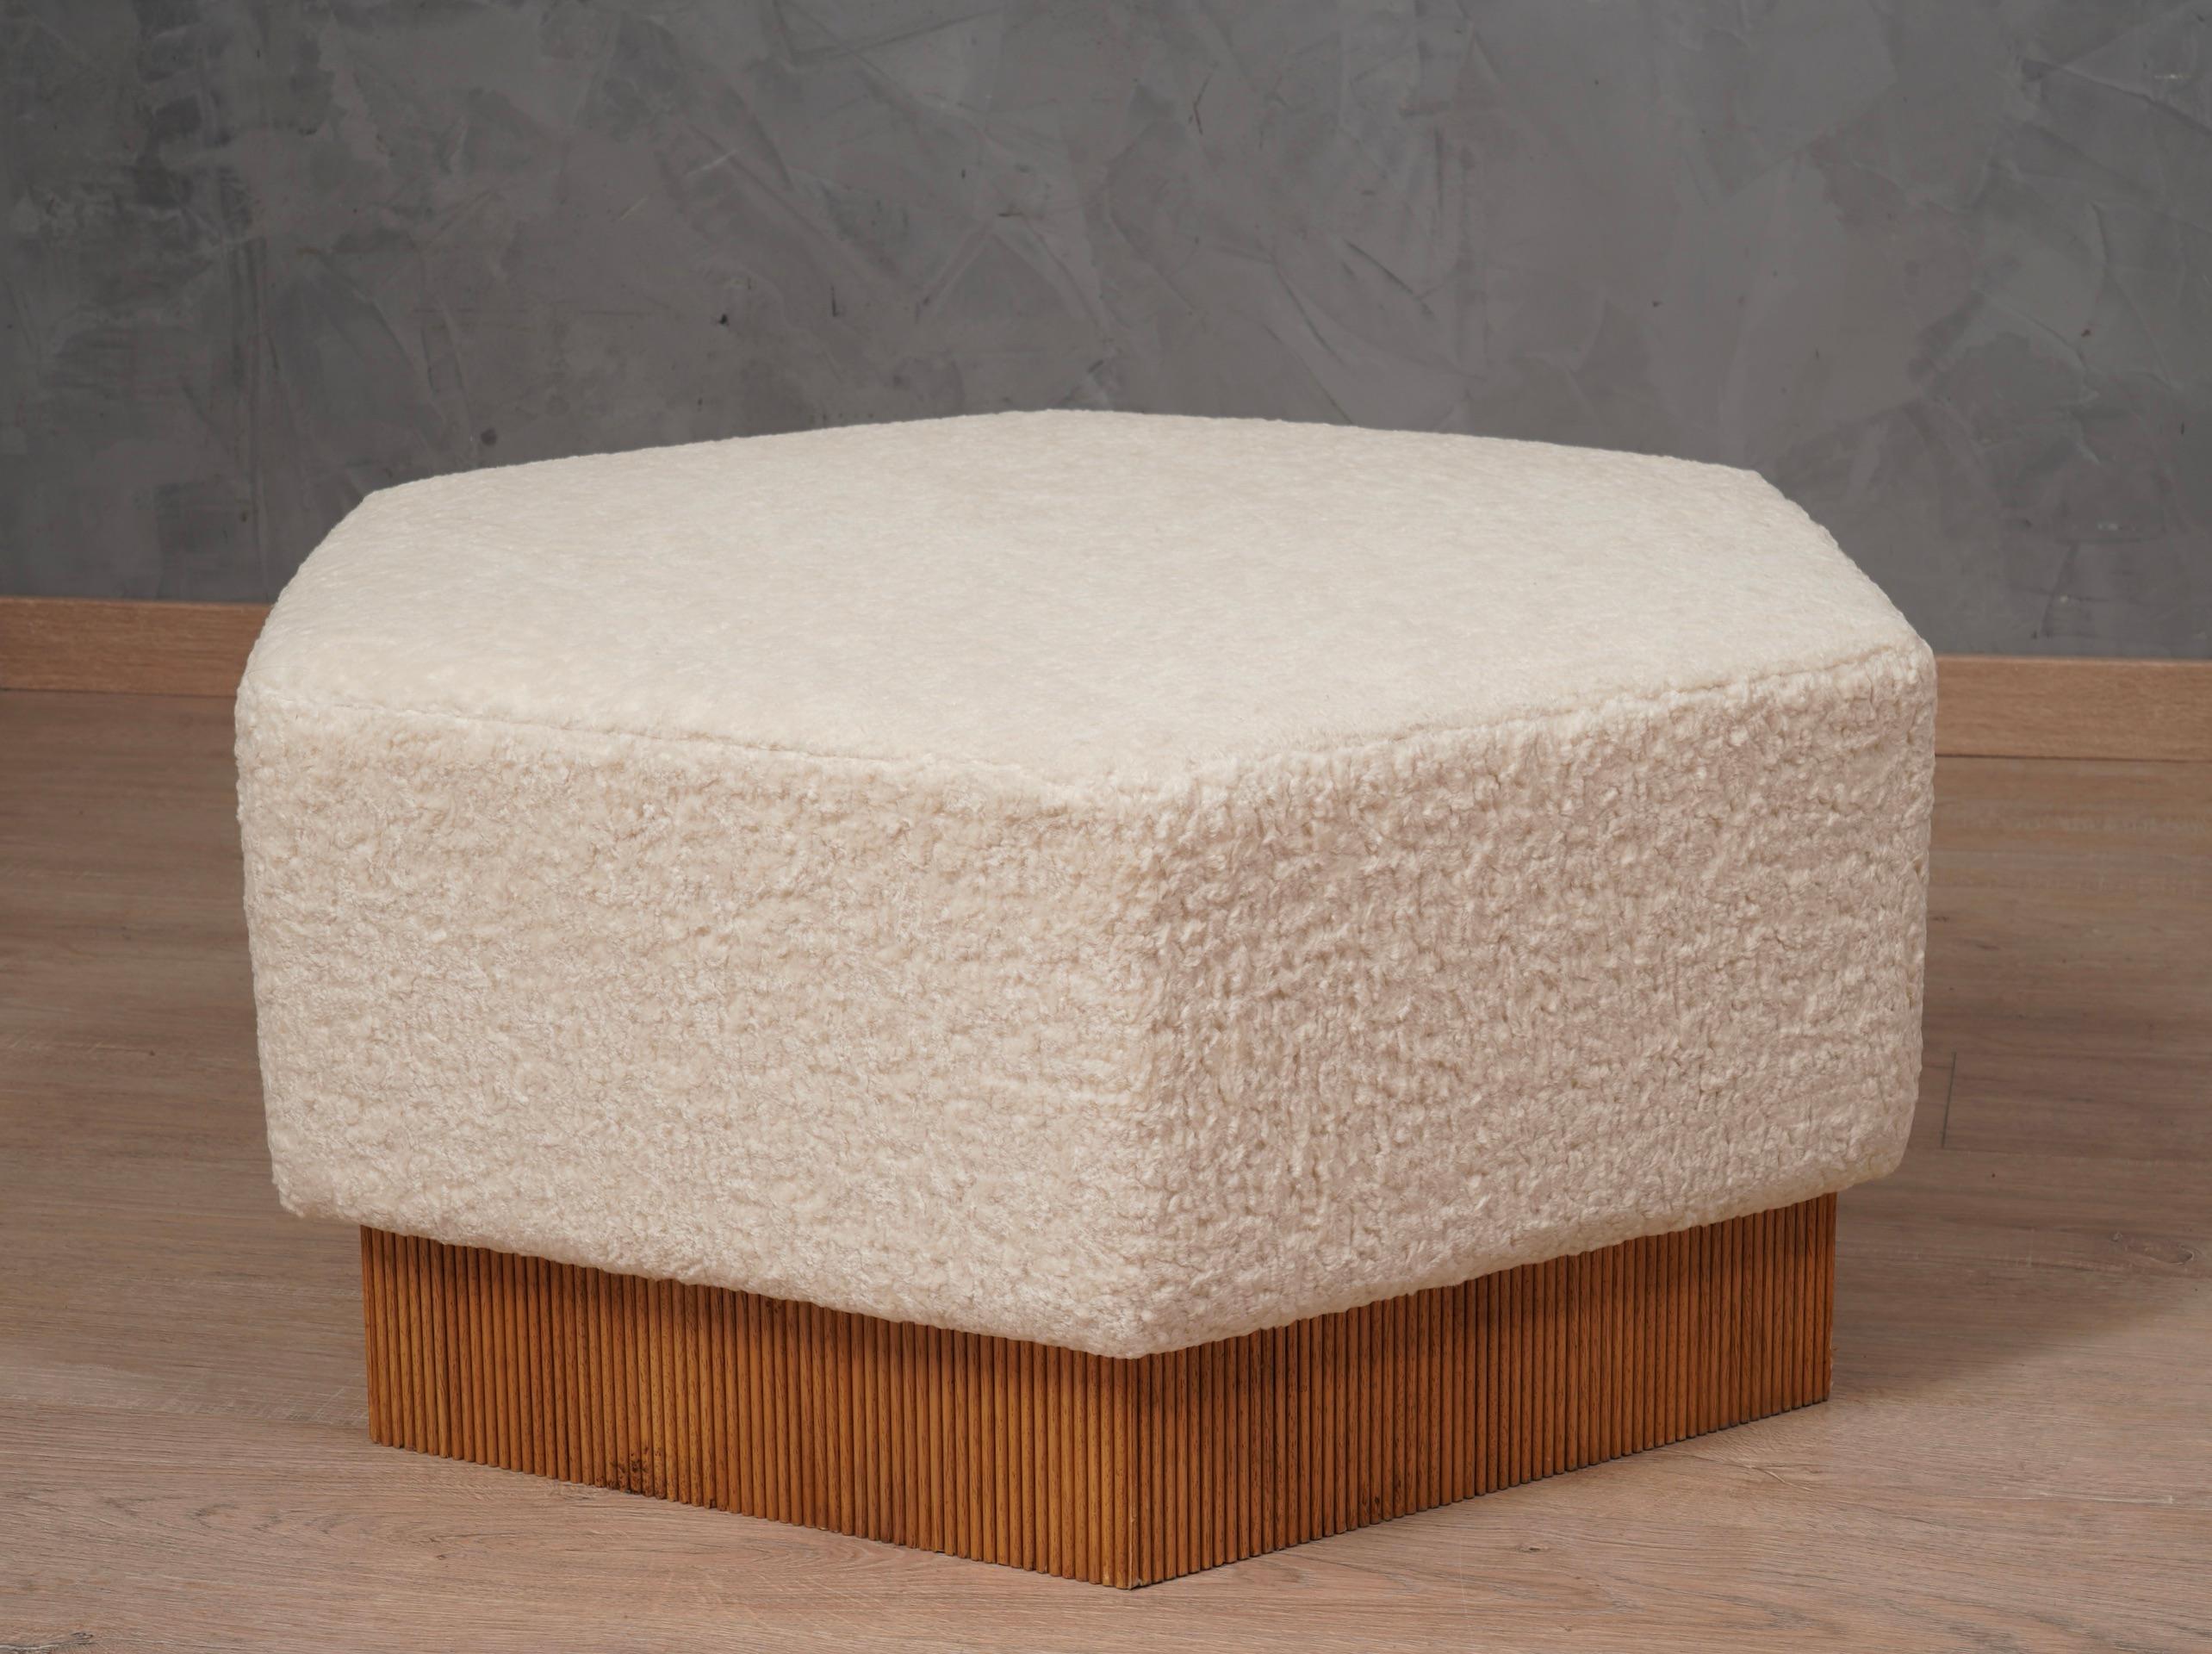 Very particular design and character for a large pouf in wood and white fabric. The pouf has a very elegant design, it is upholstered along its entire perimeter and therefore can be placed centrally in a room.

The pouf is hexagonal in shape, it is